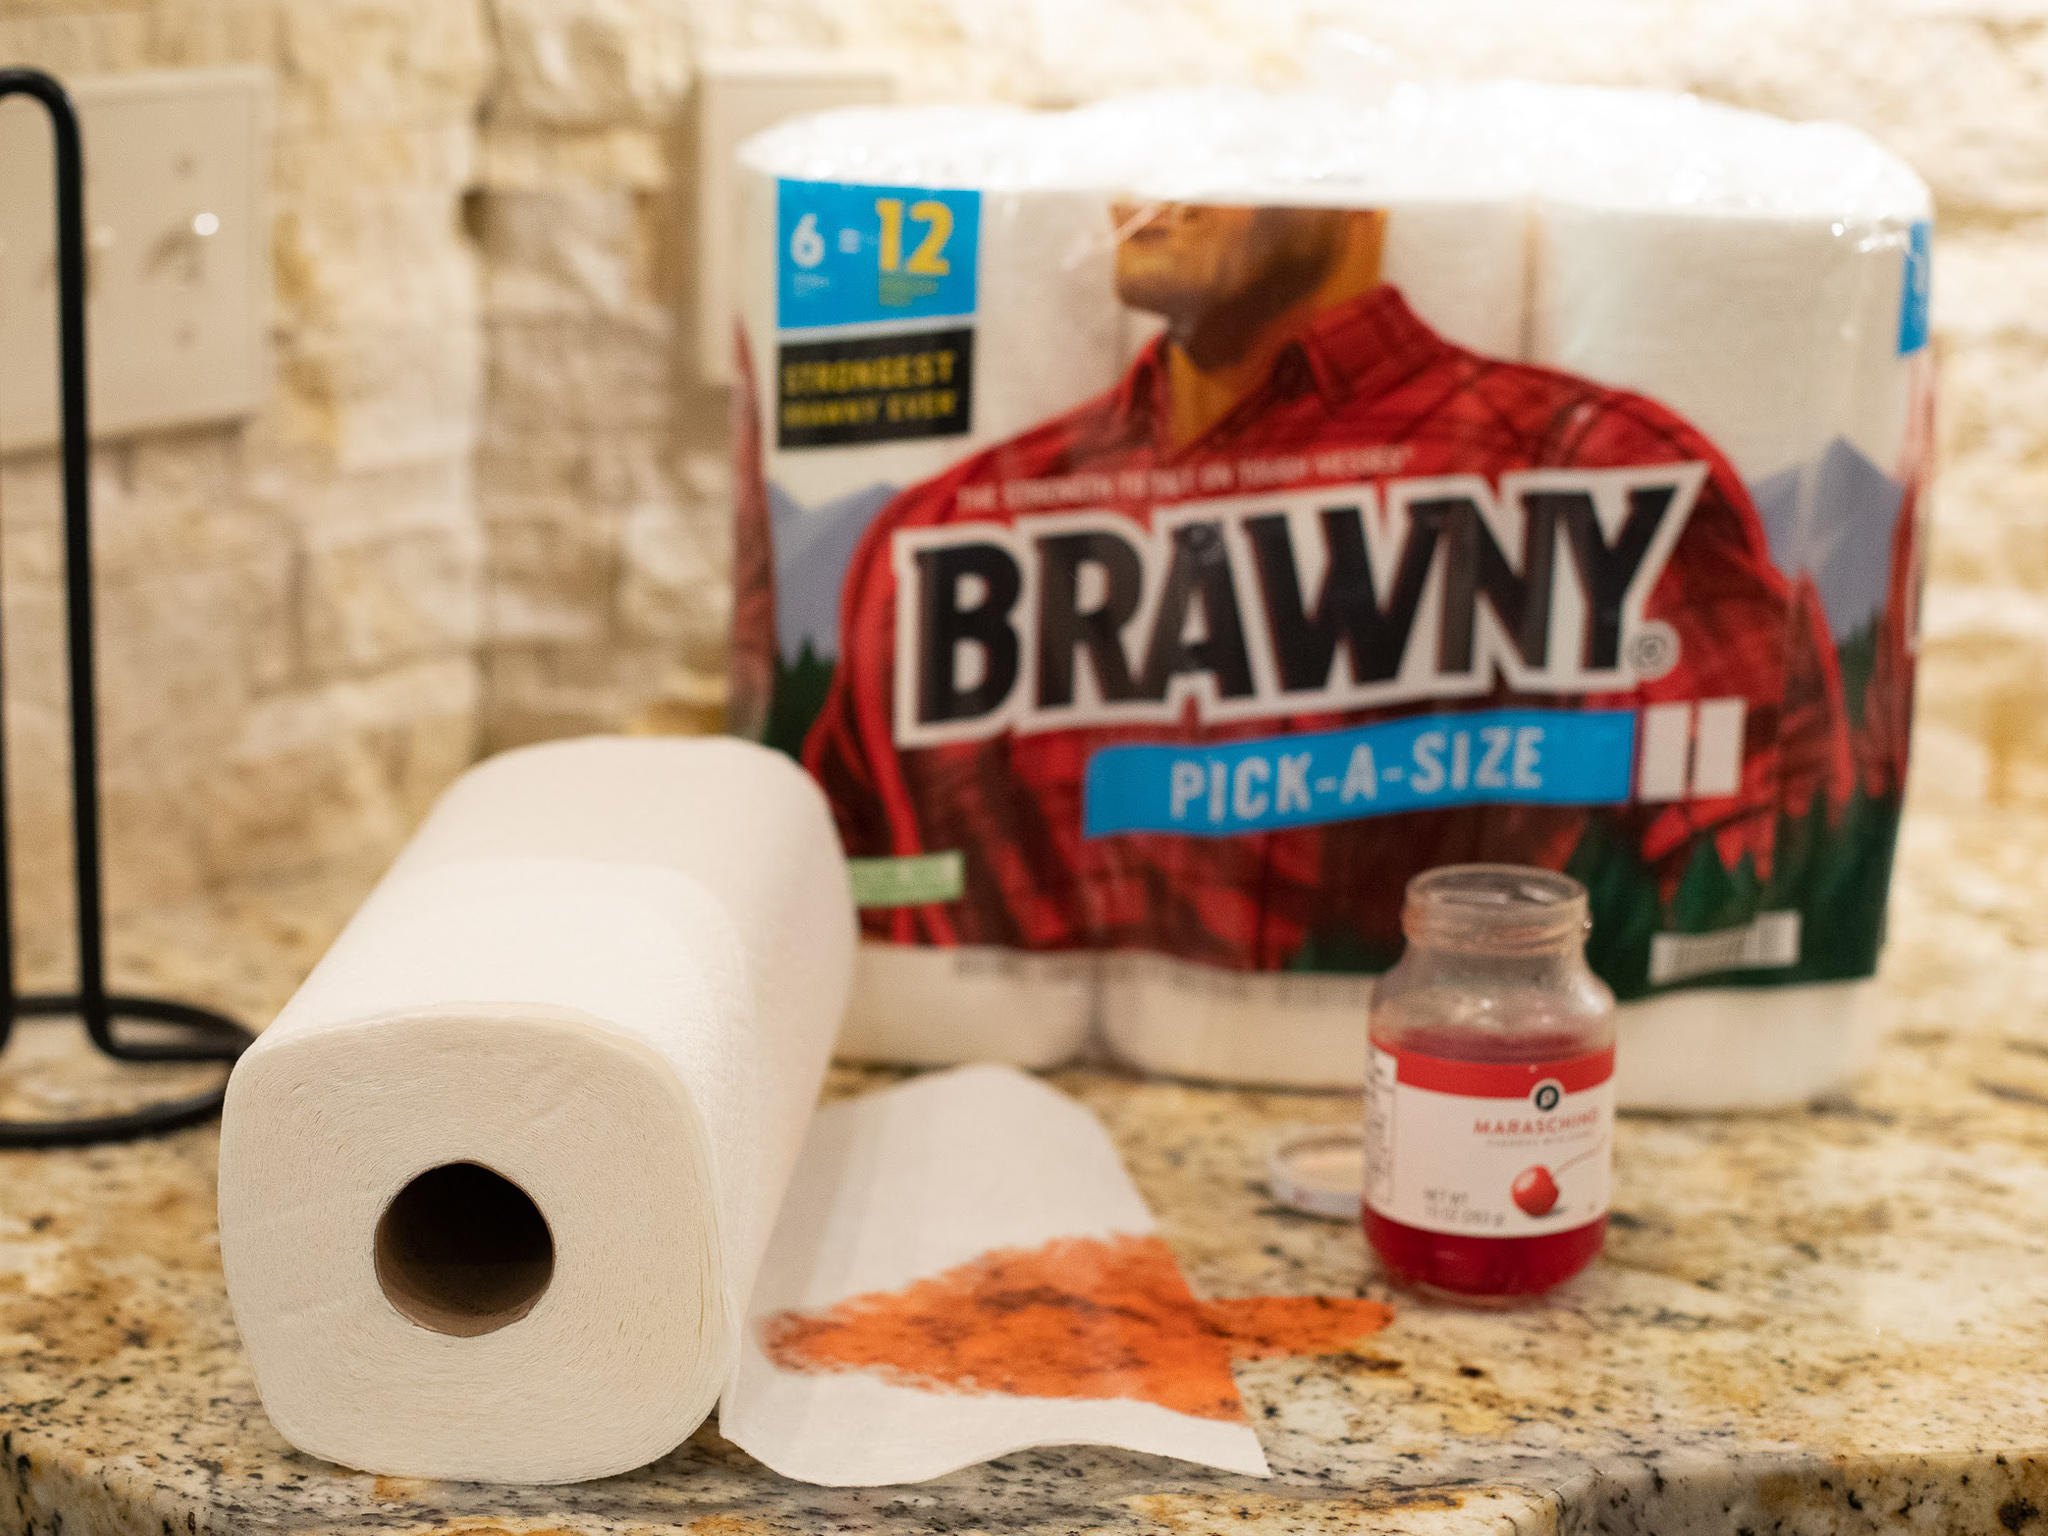 Brawny Paper Towels Are Just $5.90 At Publix (Regular Price $14.79!)